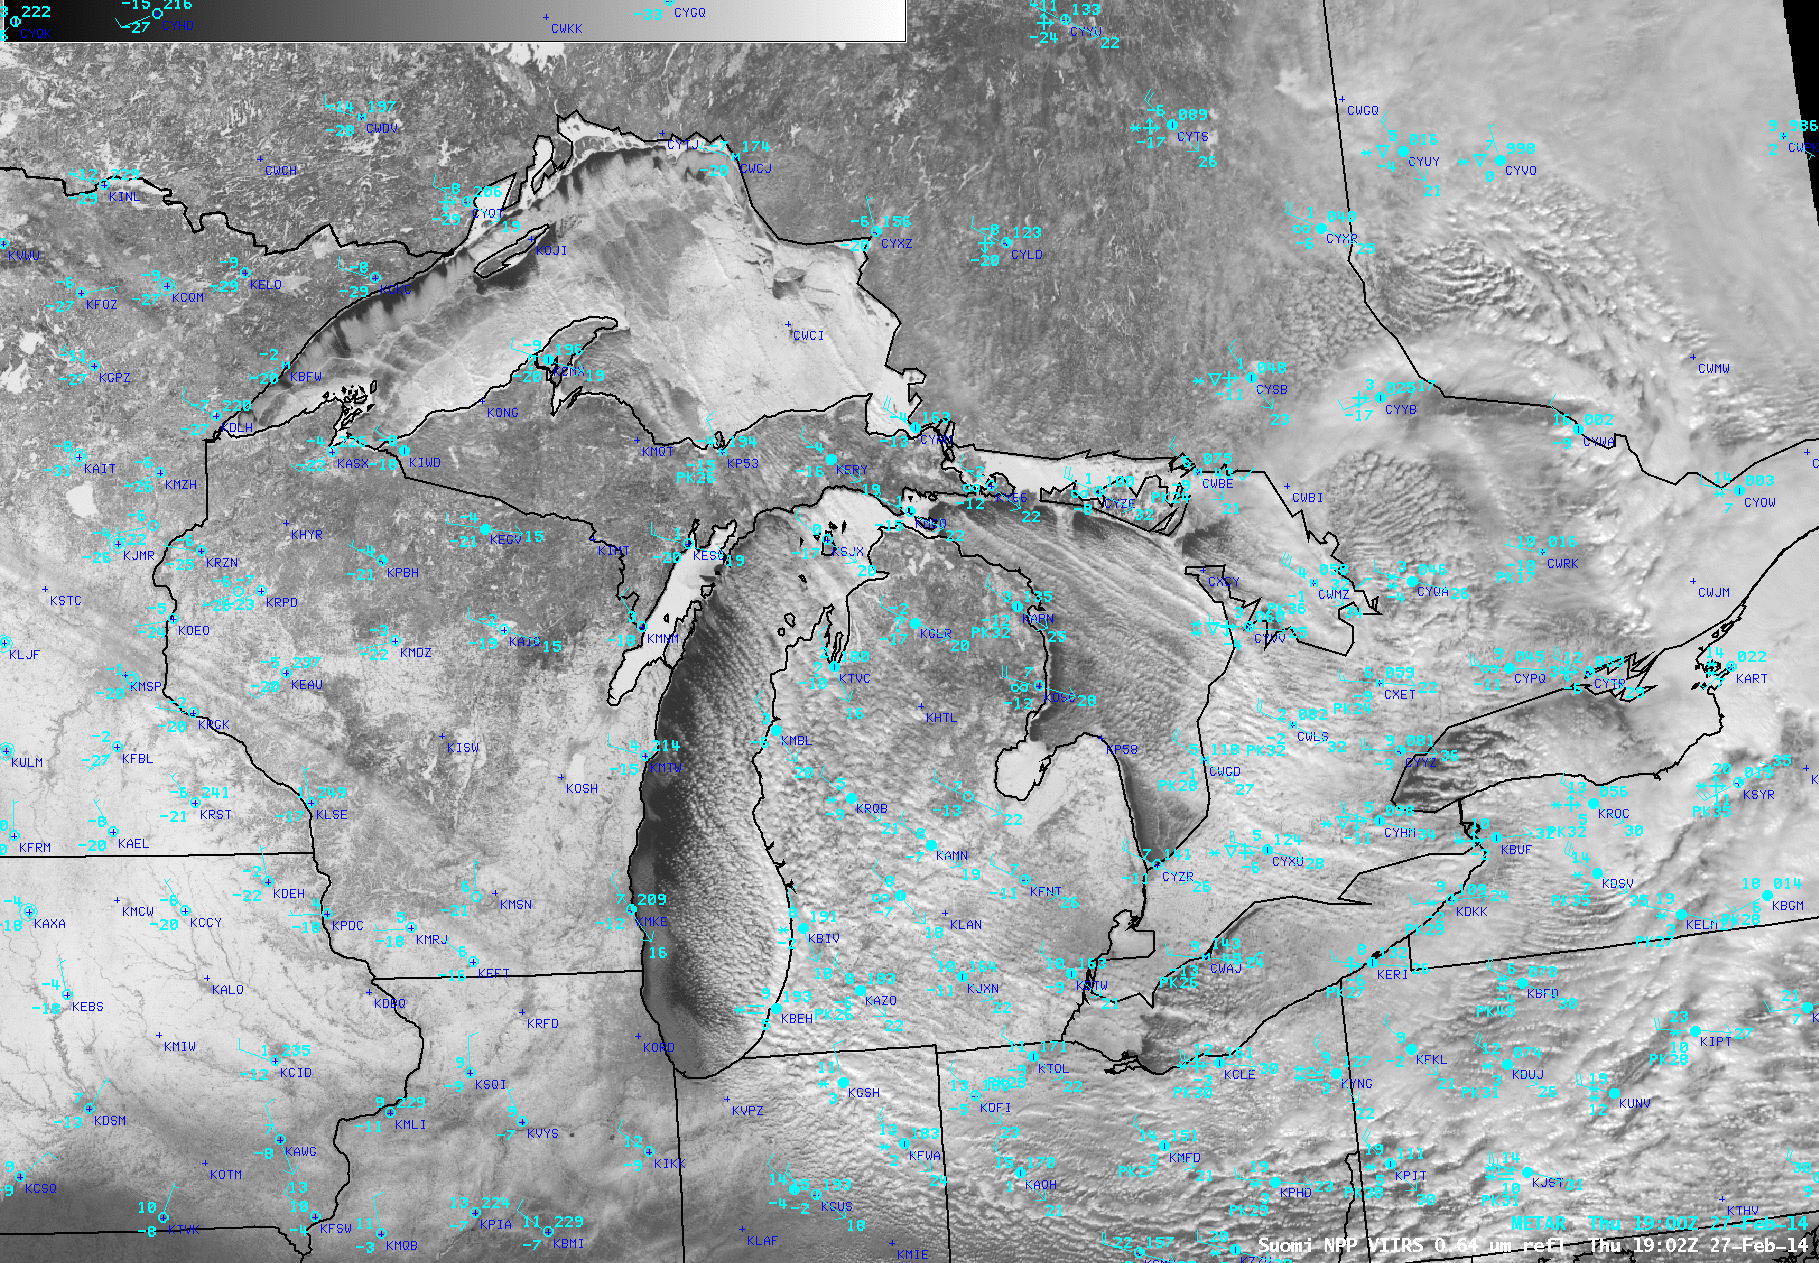 Suomi NPP VIIRS 0.64 Âµm visible channel and false-color RGB images